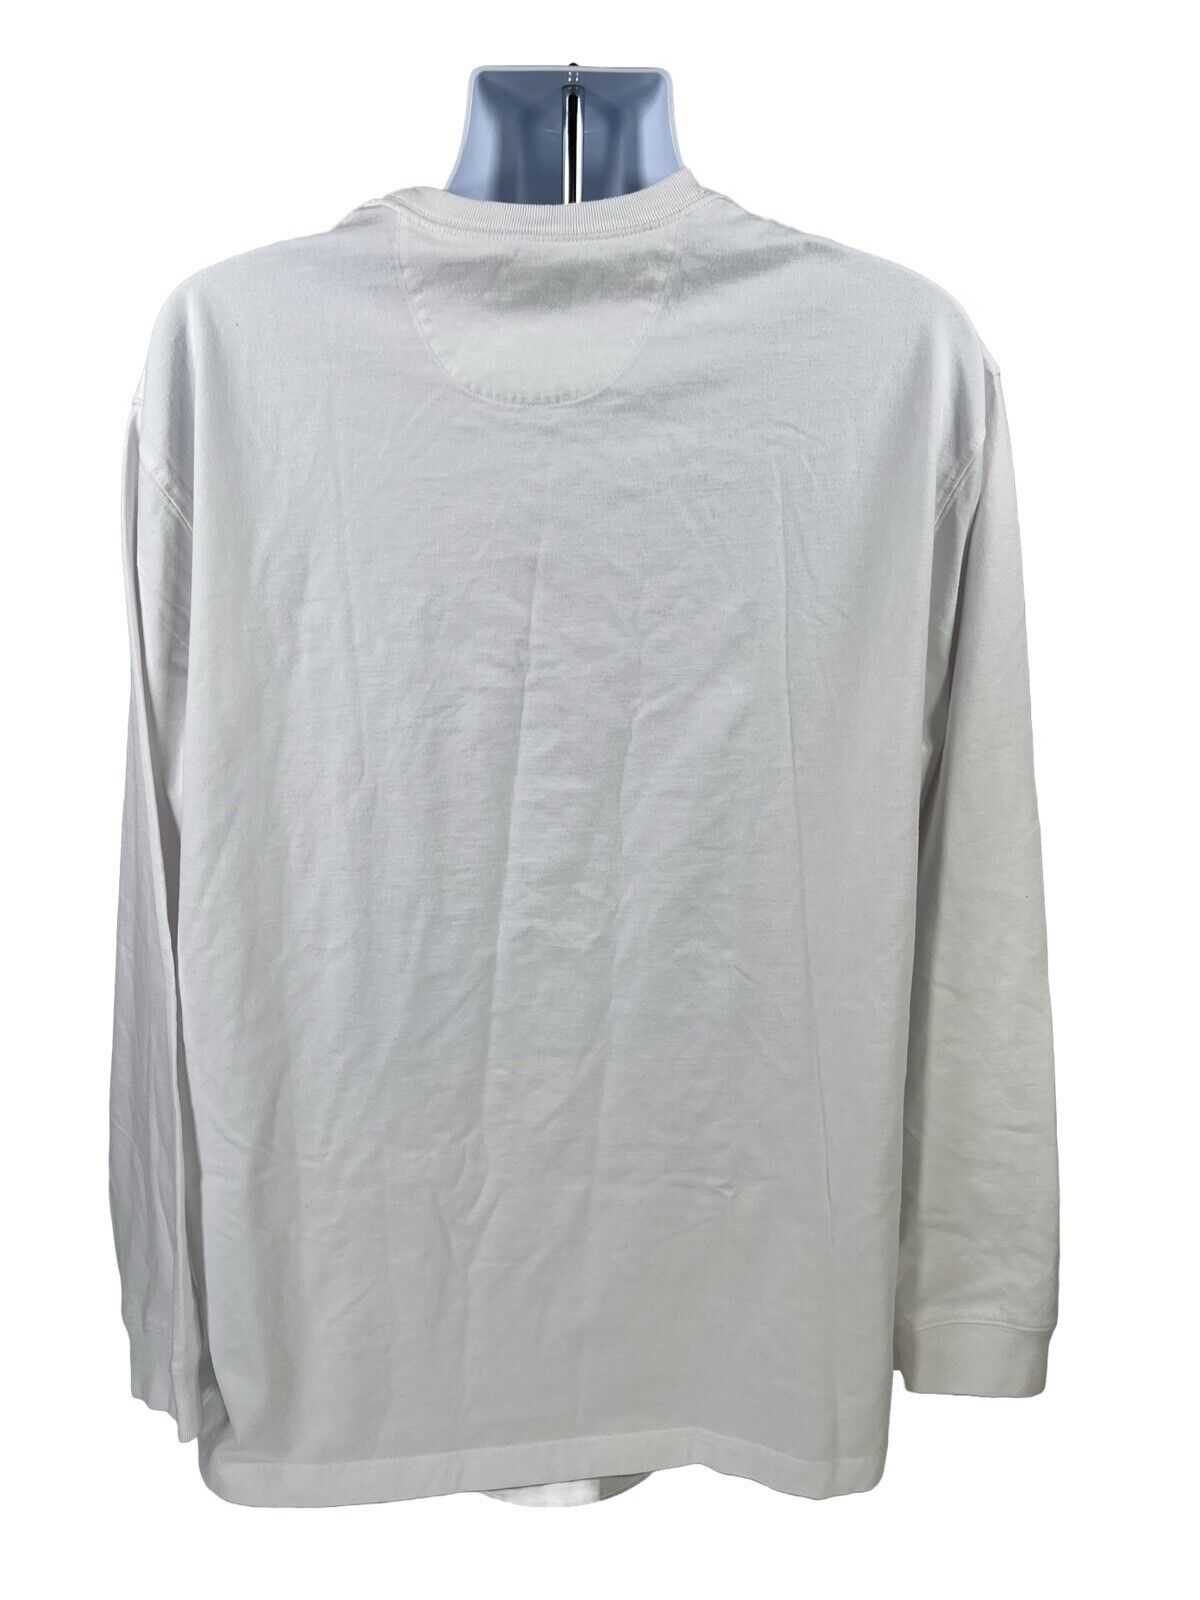 Duluth Trading Co Men's White Long Sleeve Cotton Longtail T Shirt - L